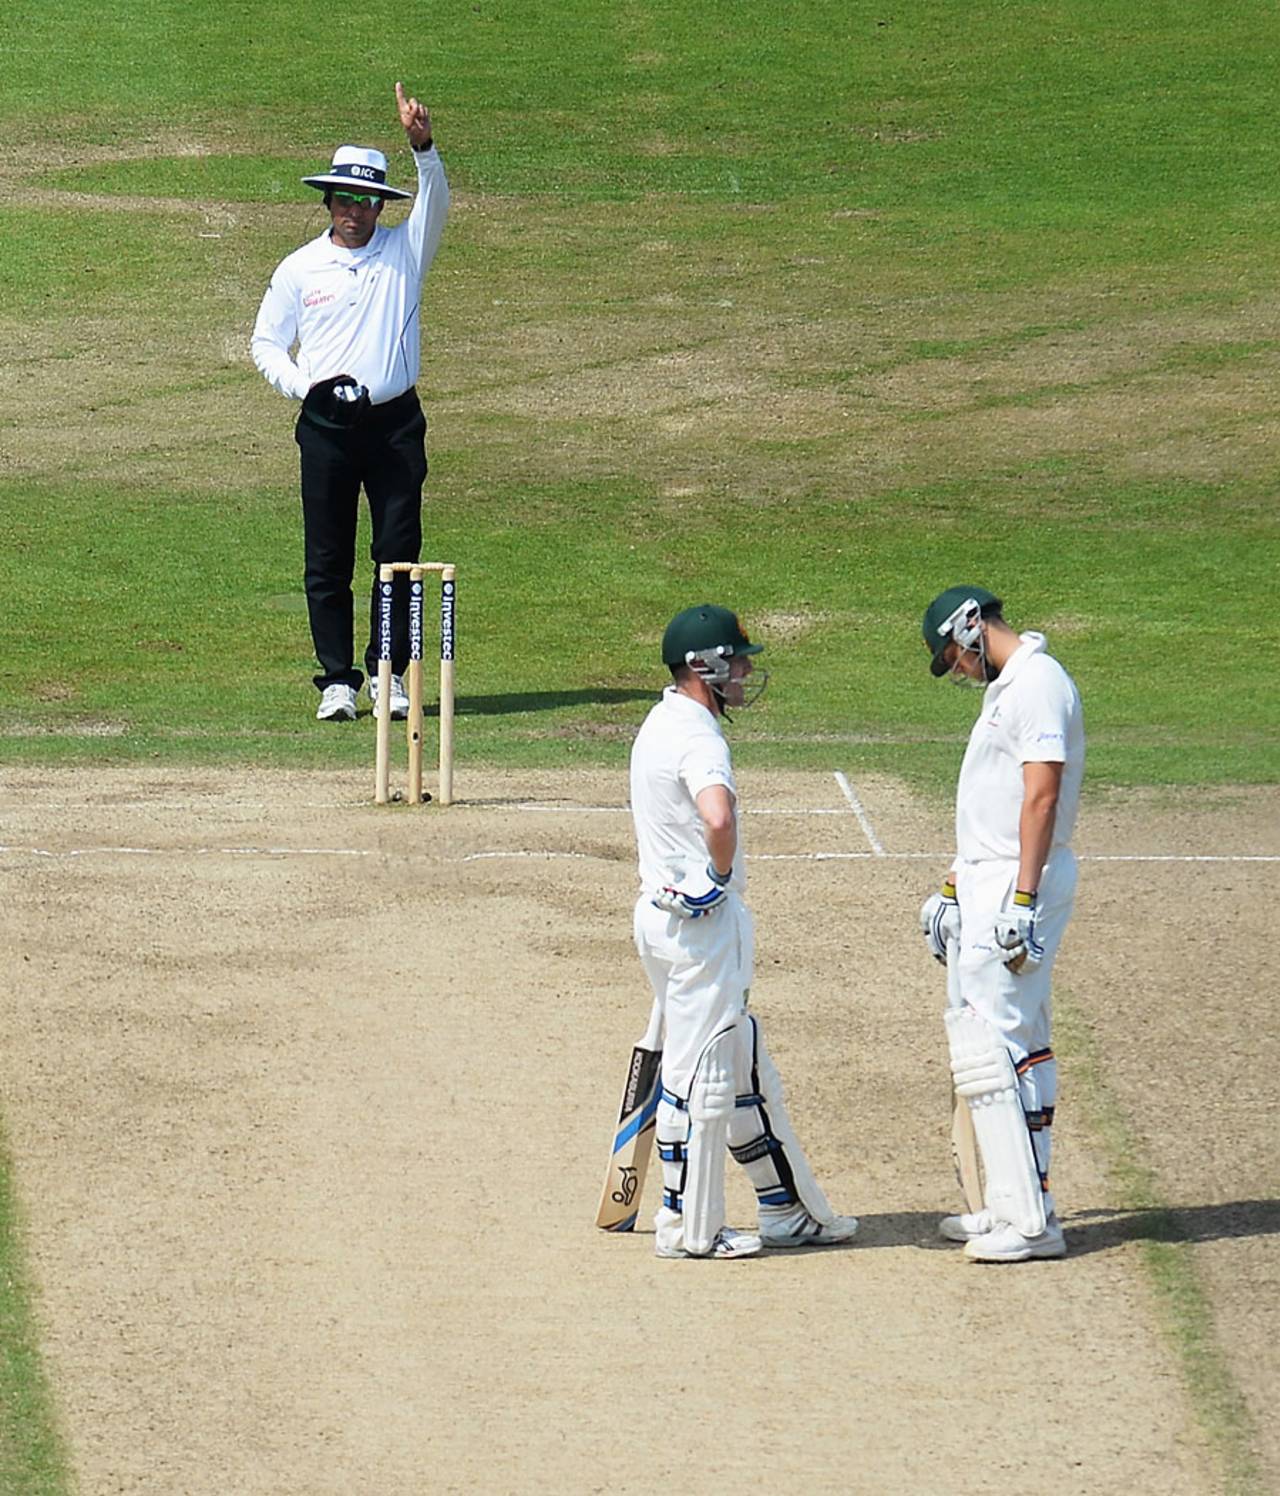 James Pattinson (right) bows his head as Aleem Dar gives the final decision, England v Australia, 1st Investec Test, Trent Bridge, 5th day, July 14, 2013